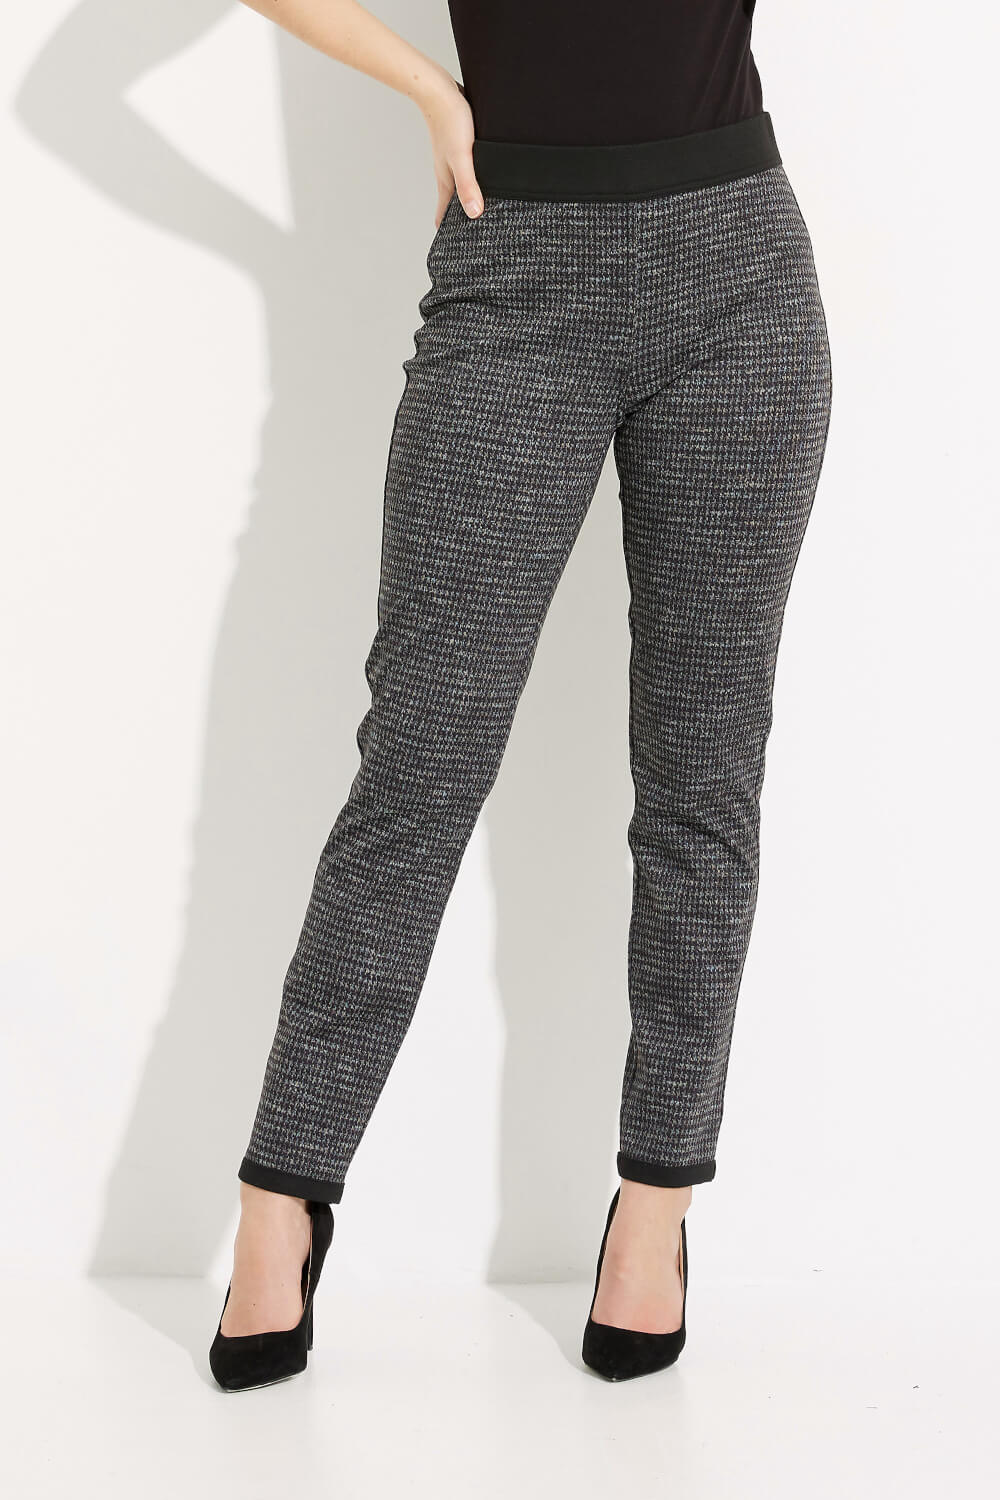 Houndstooth Pattern Pant Style 233195. Black/grey